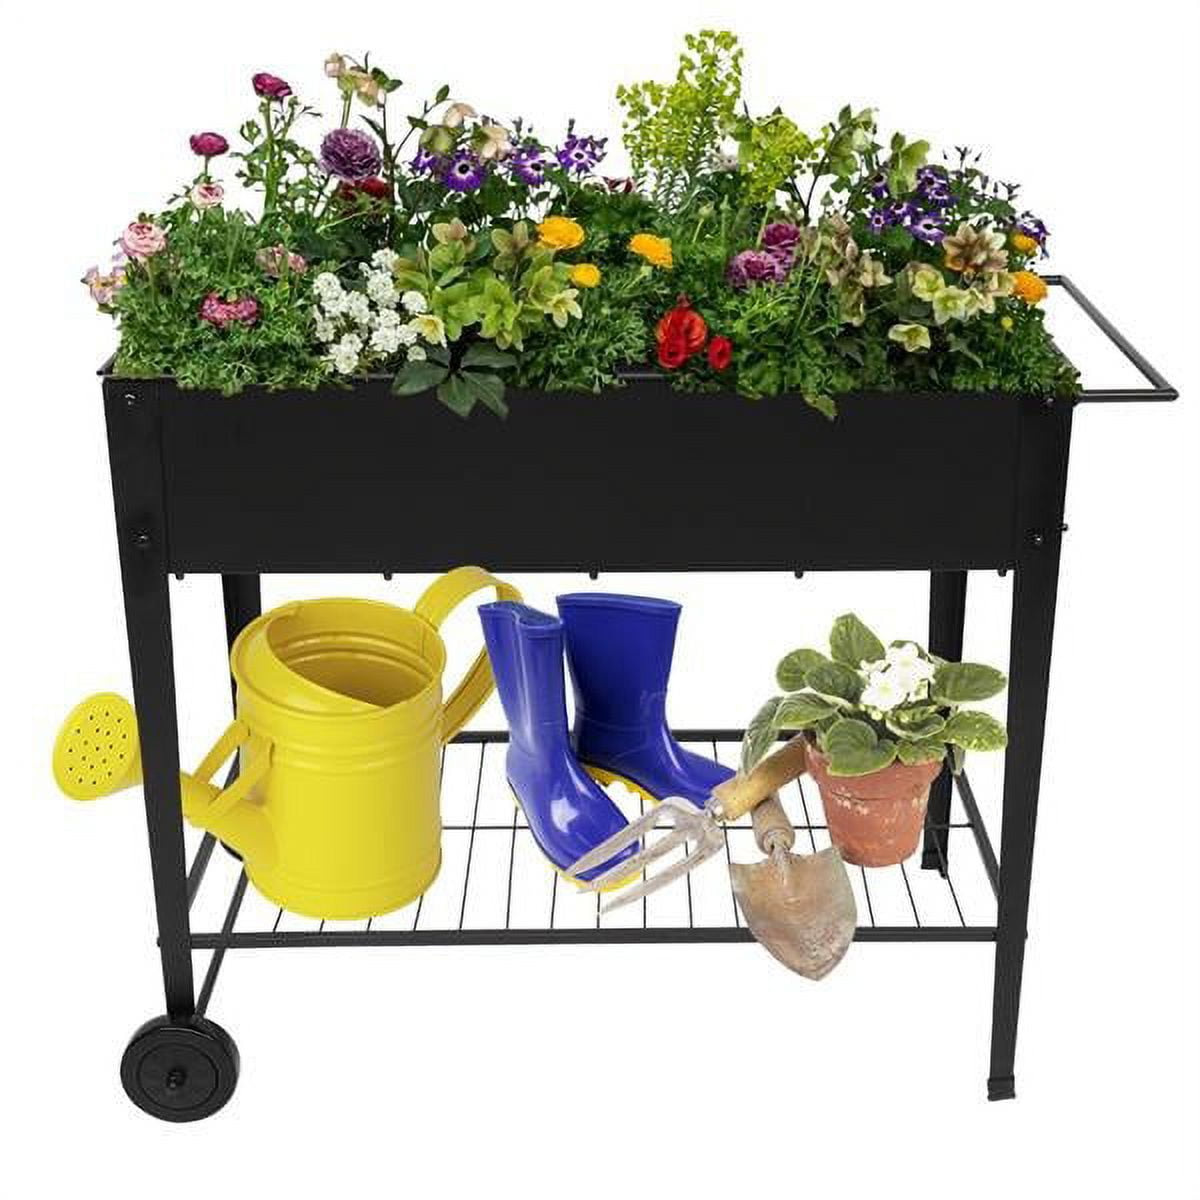 Branax Raised Garden Bed With Wheels And Legs Elevated Planter Metal Raised Garden Boxes